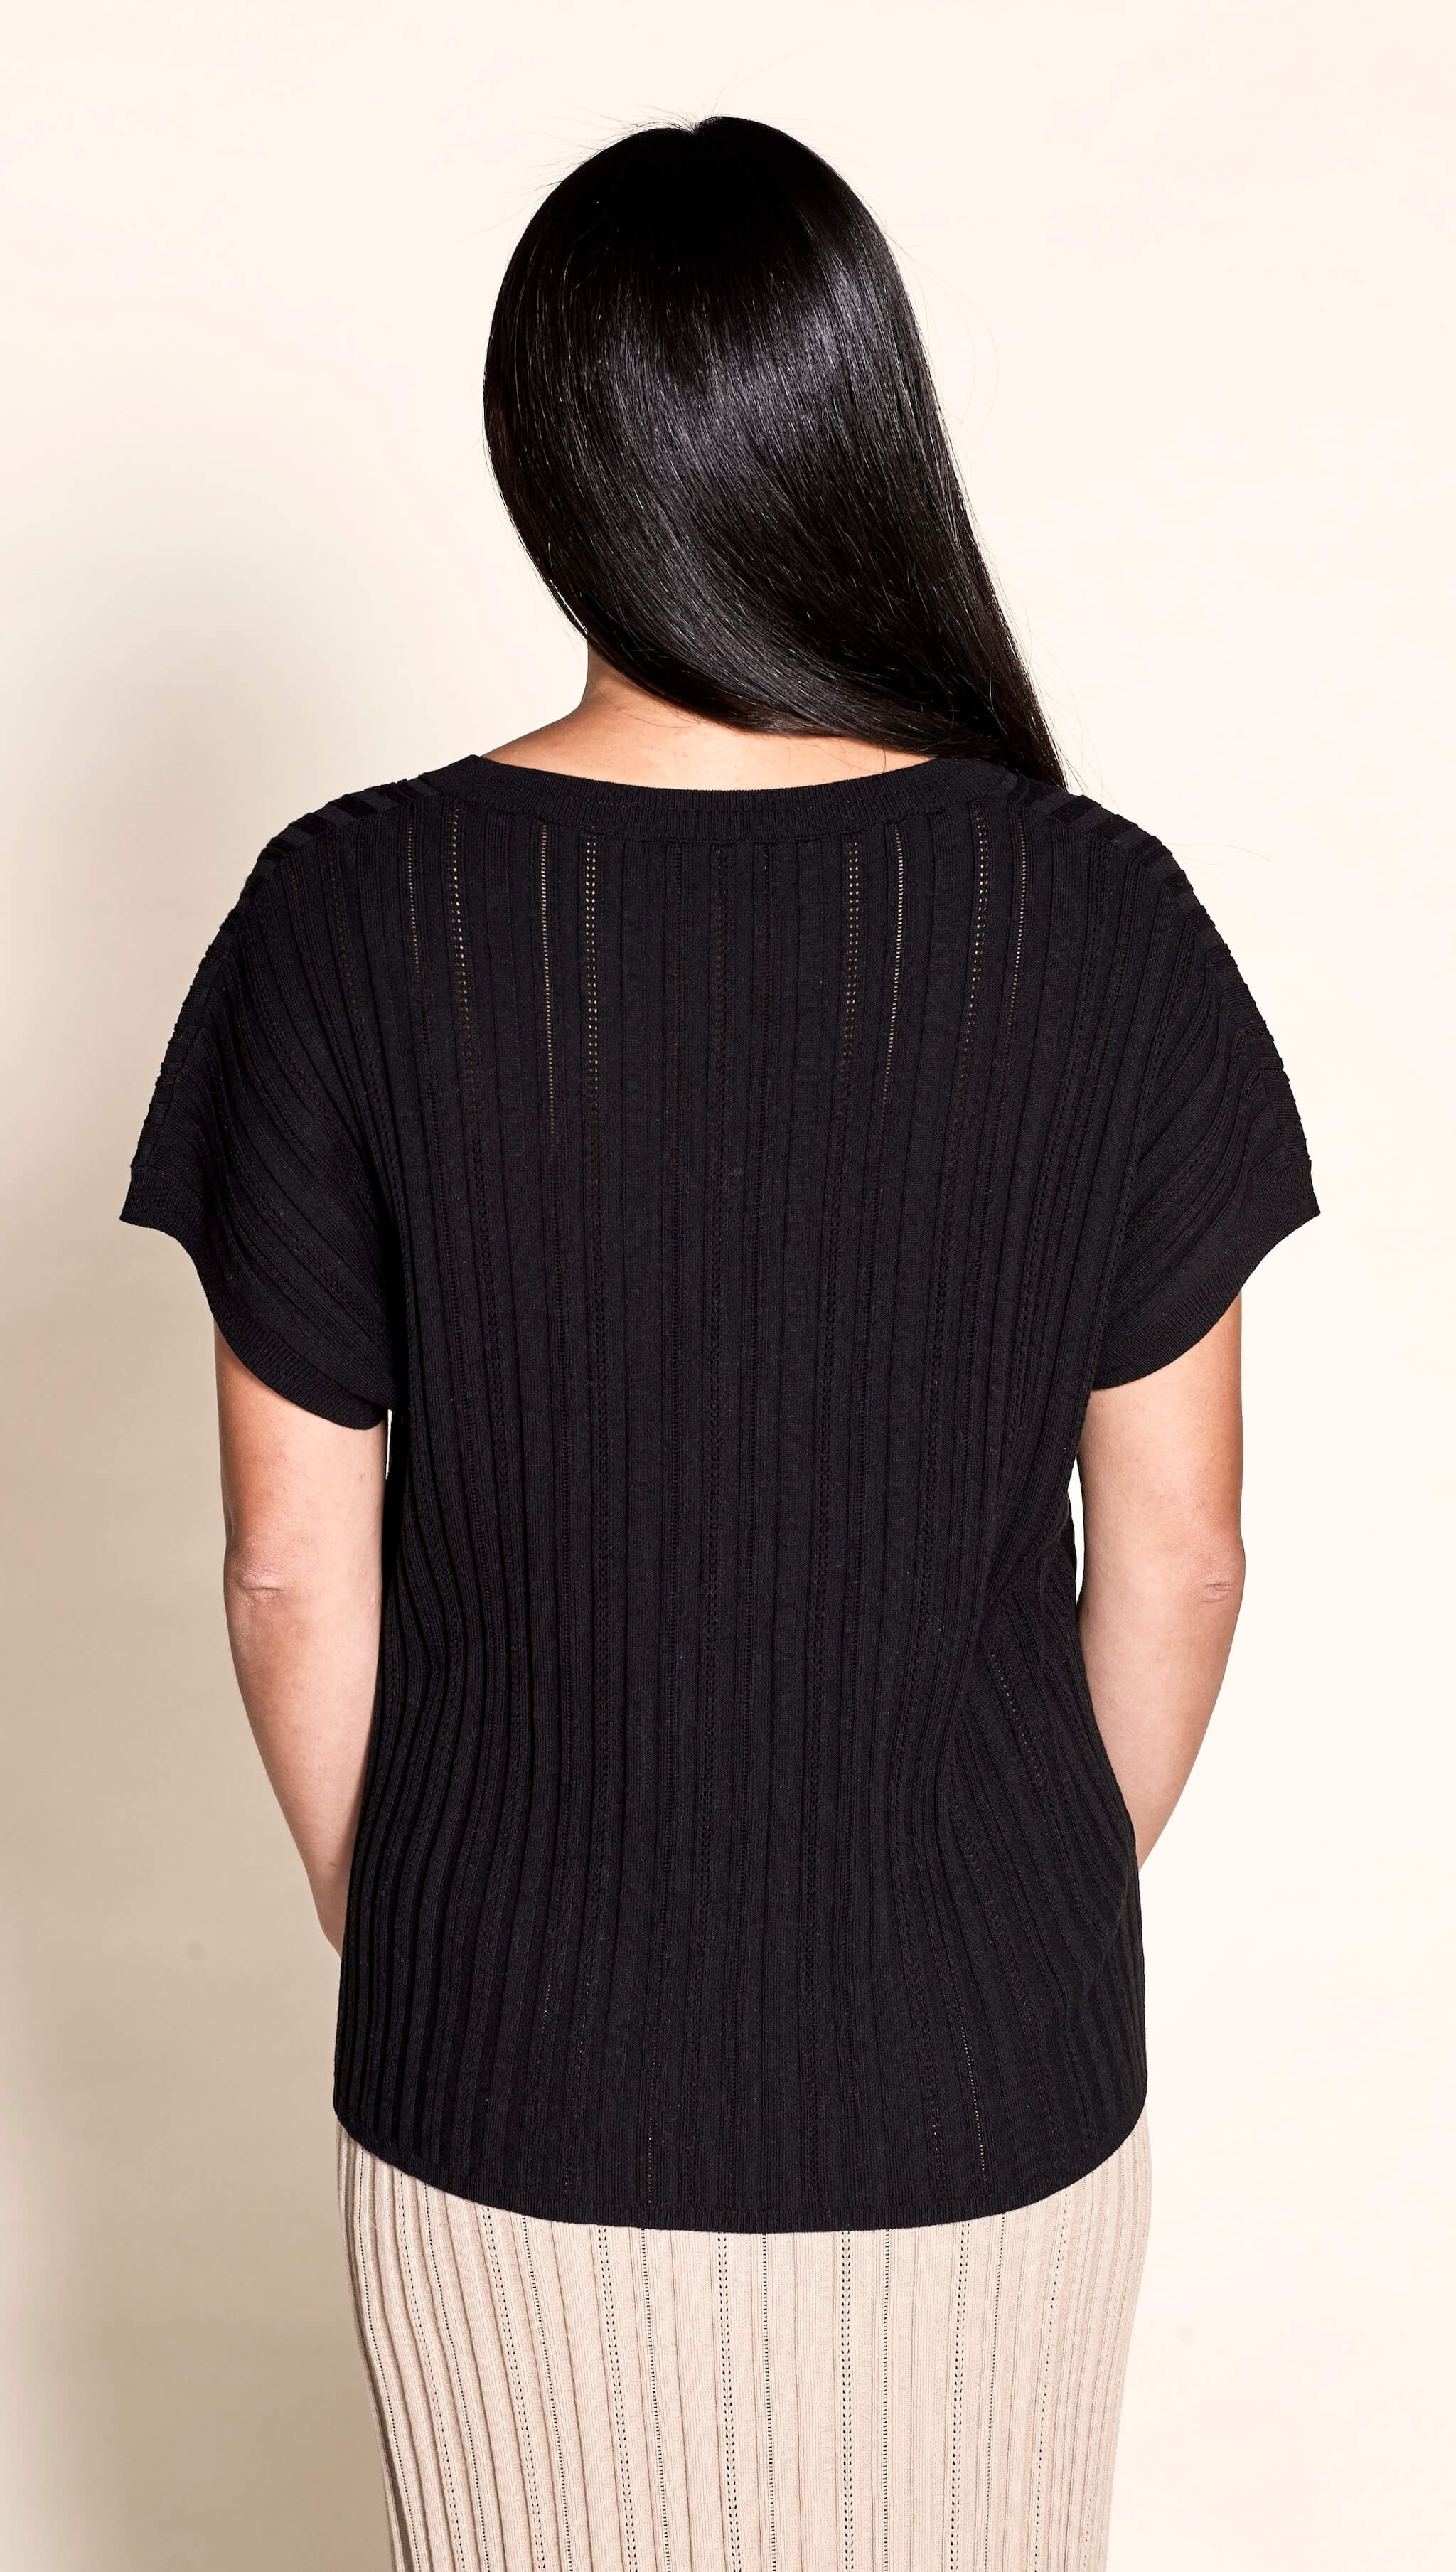 Rear view of a sleek pointelle ribbed black top by Cyme Copenhagen, highlighting the brand's focus on minimalist design and sustainable, high-quality natural fabrics in contemporary women's clothing.